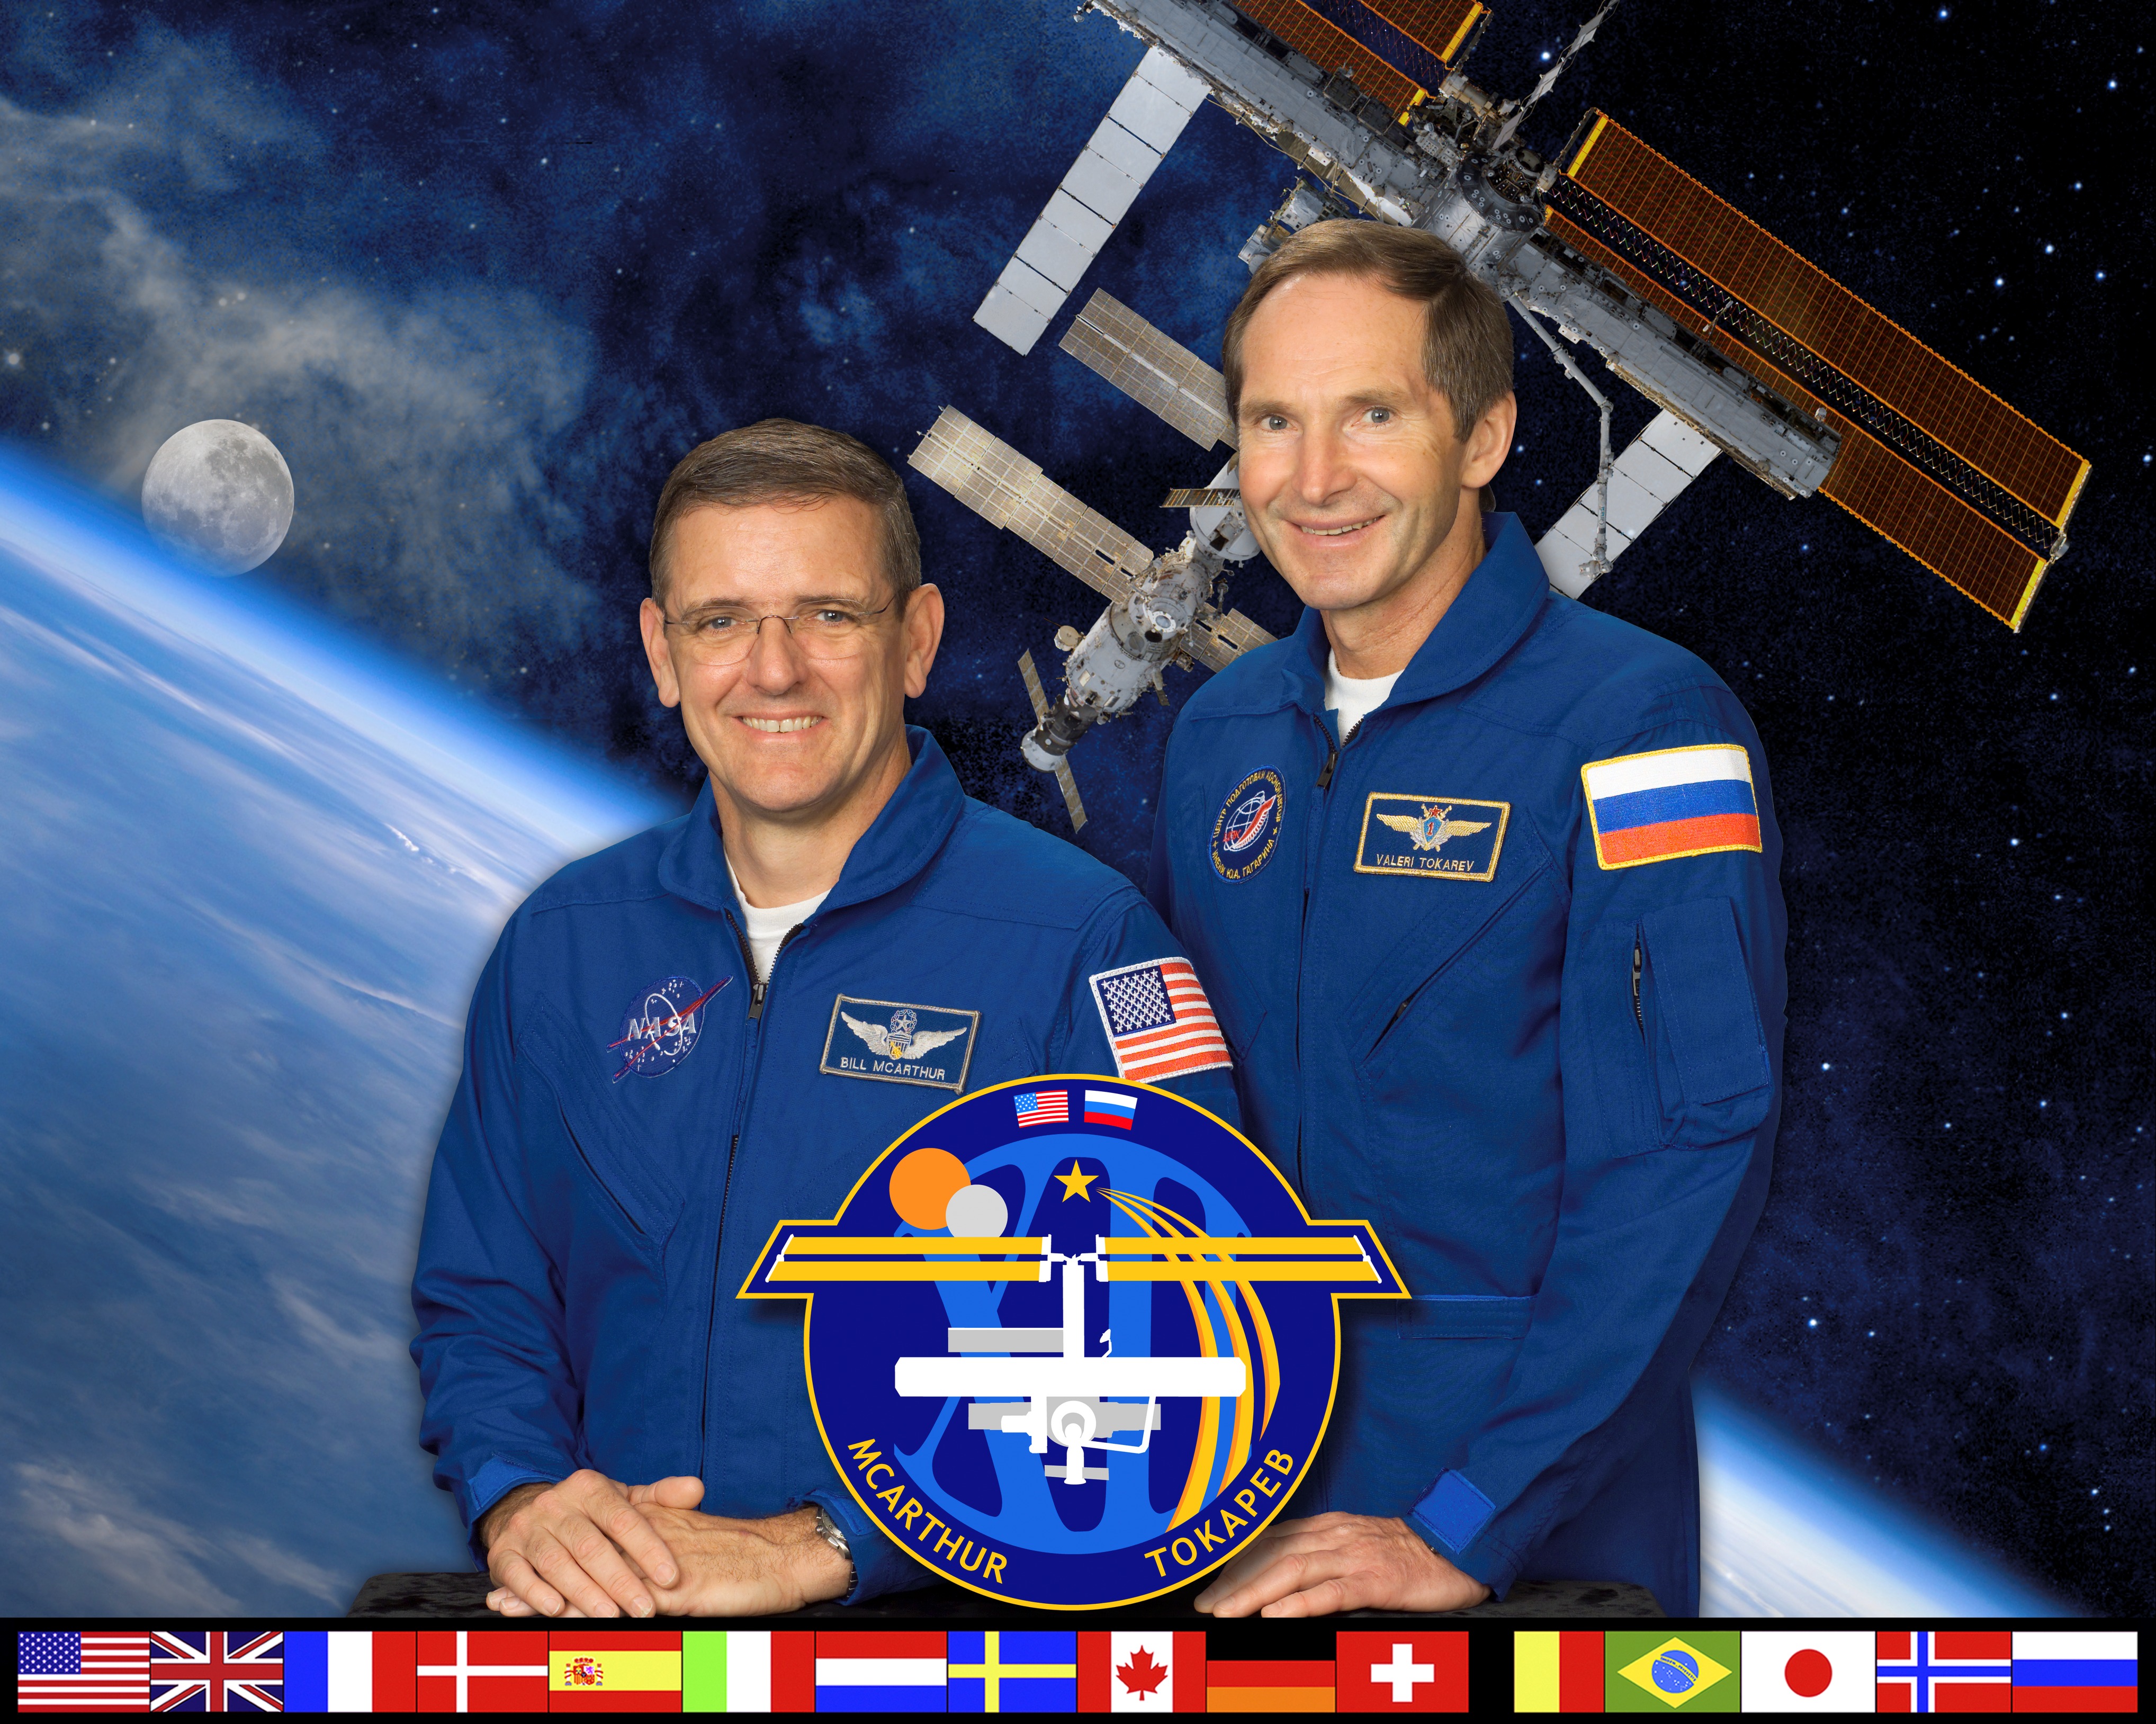 Two male astronauts in blue flight suits pose for their Expedition 12 crew picture with an image of the ISS orbiting the Earth in the background.